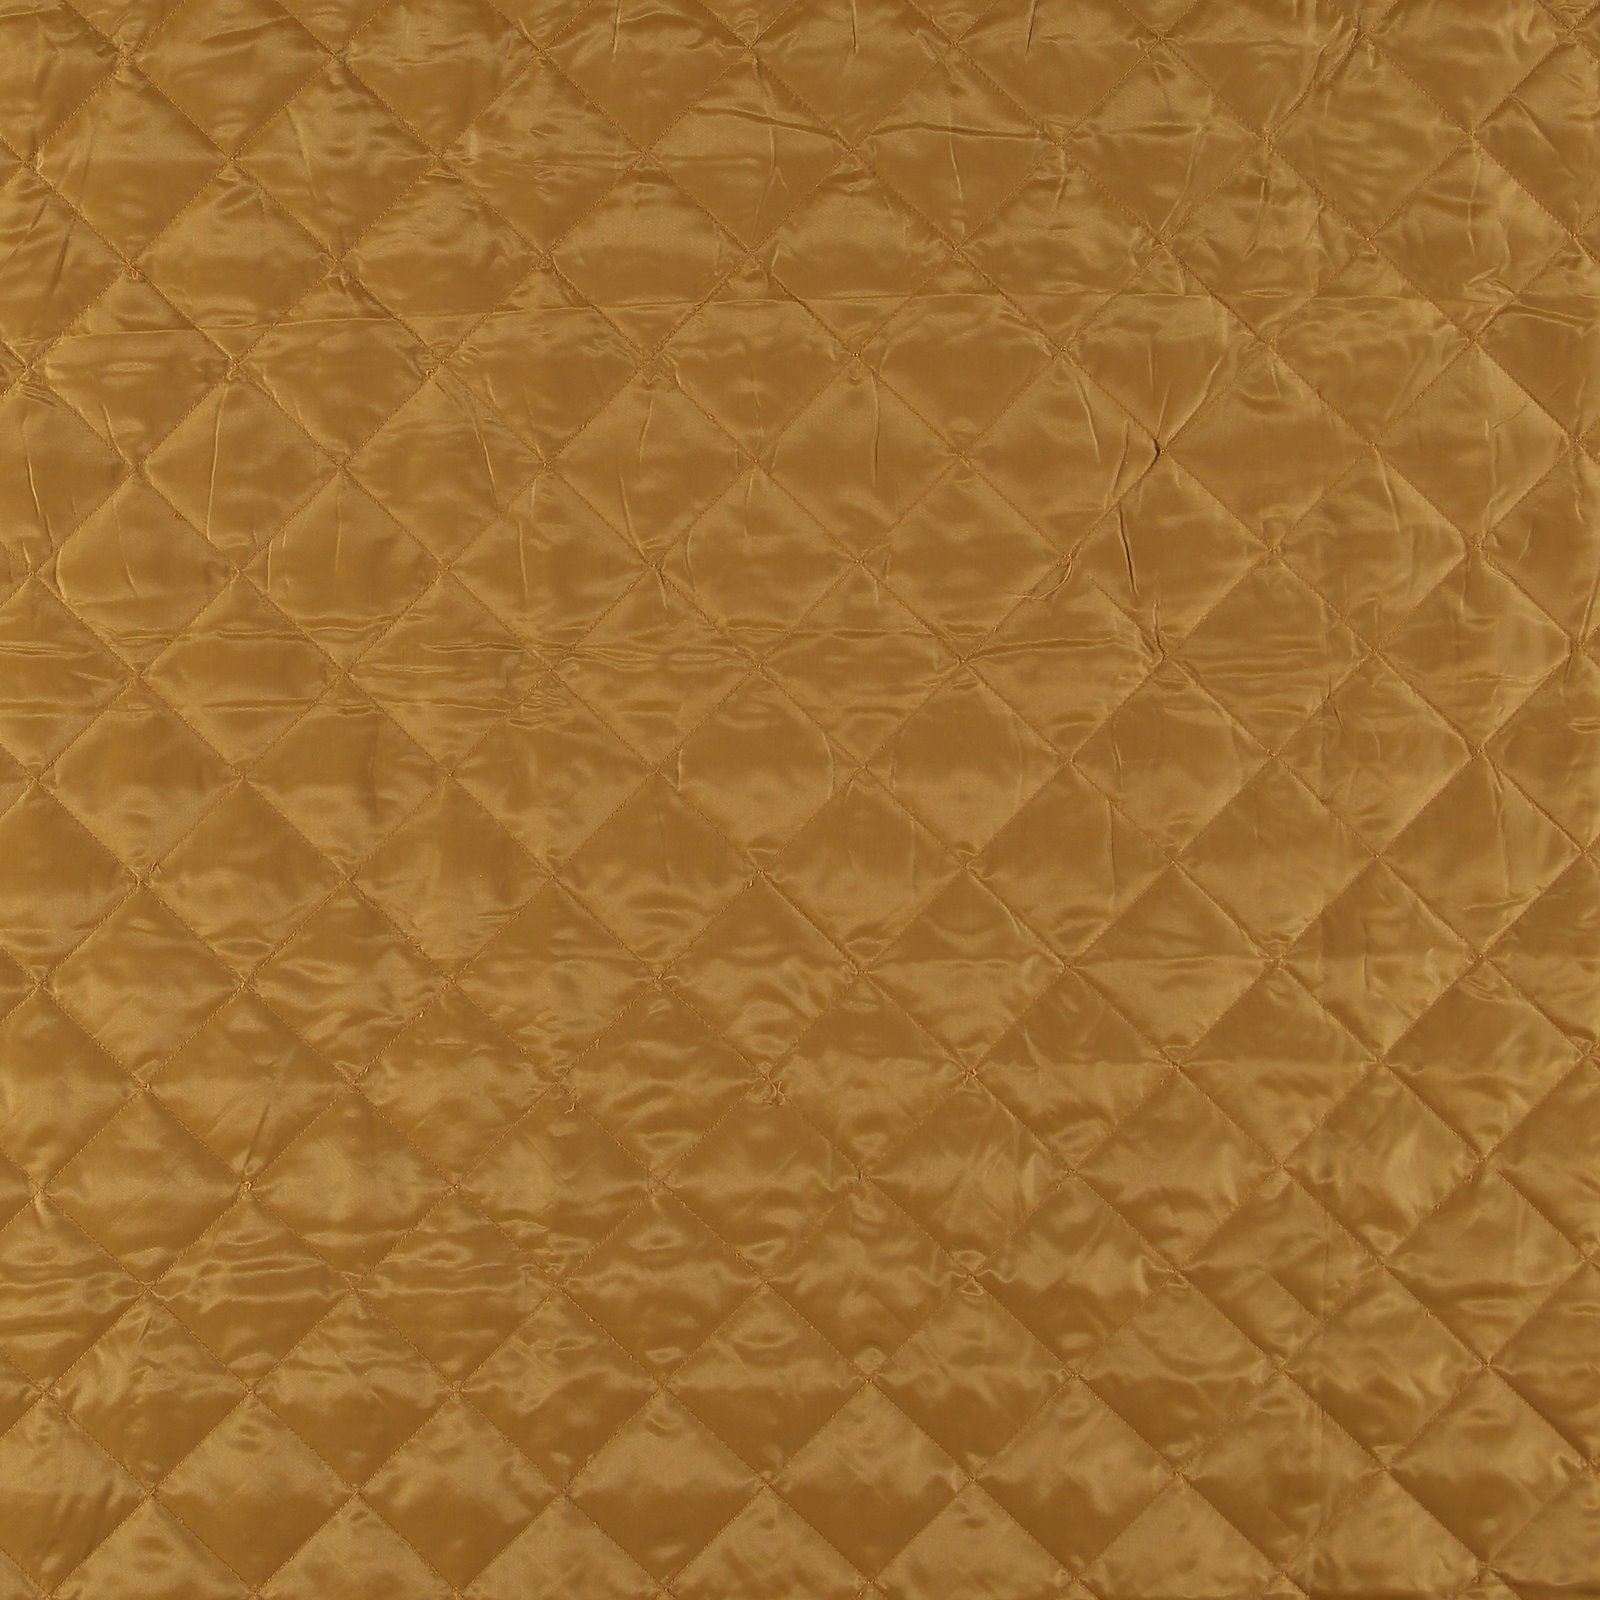 Woven quilt golden brown with lining 920218_pack_sp